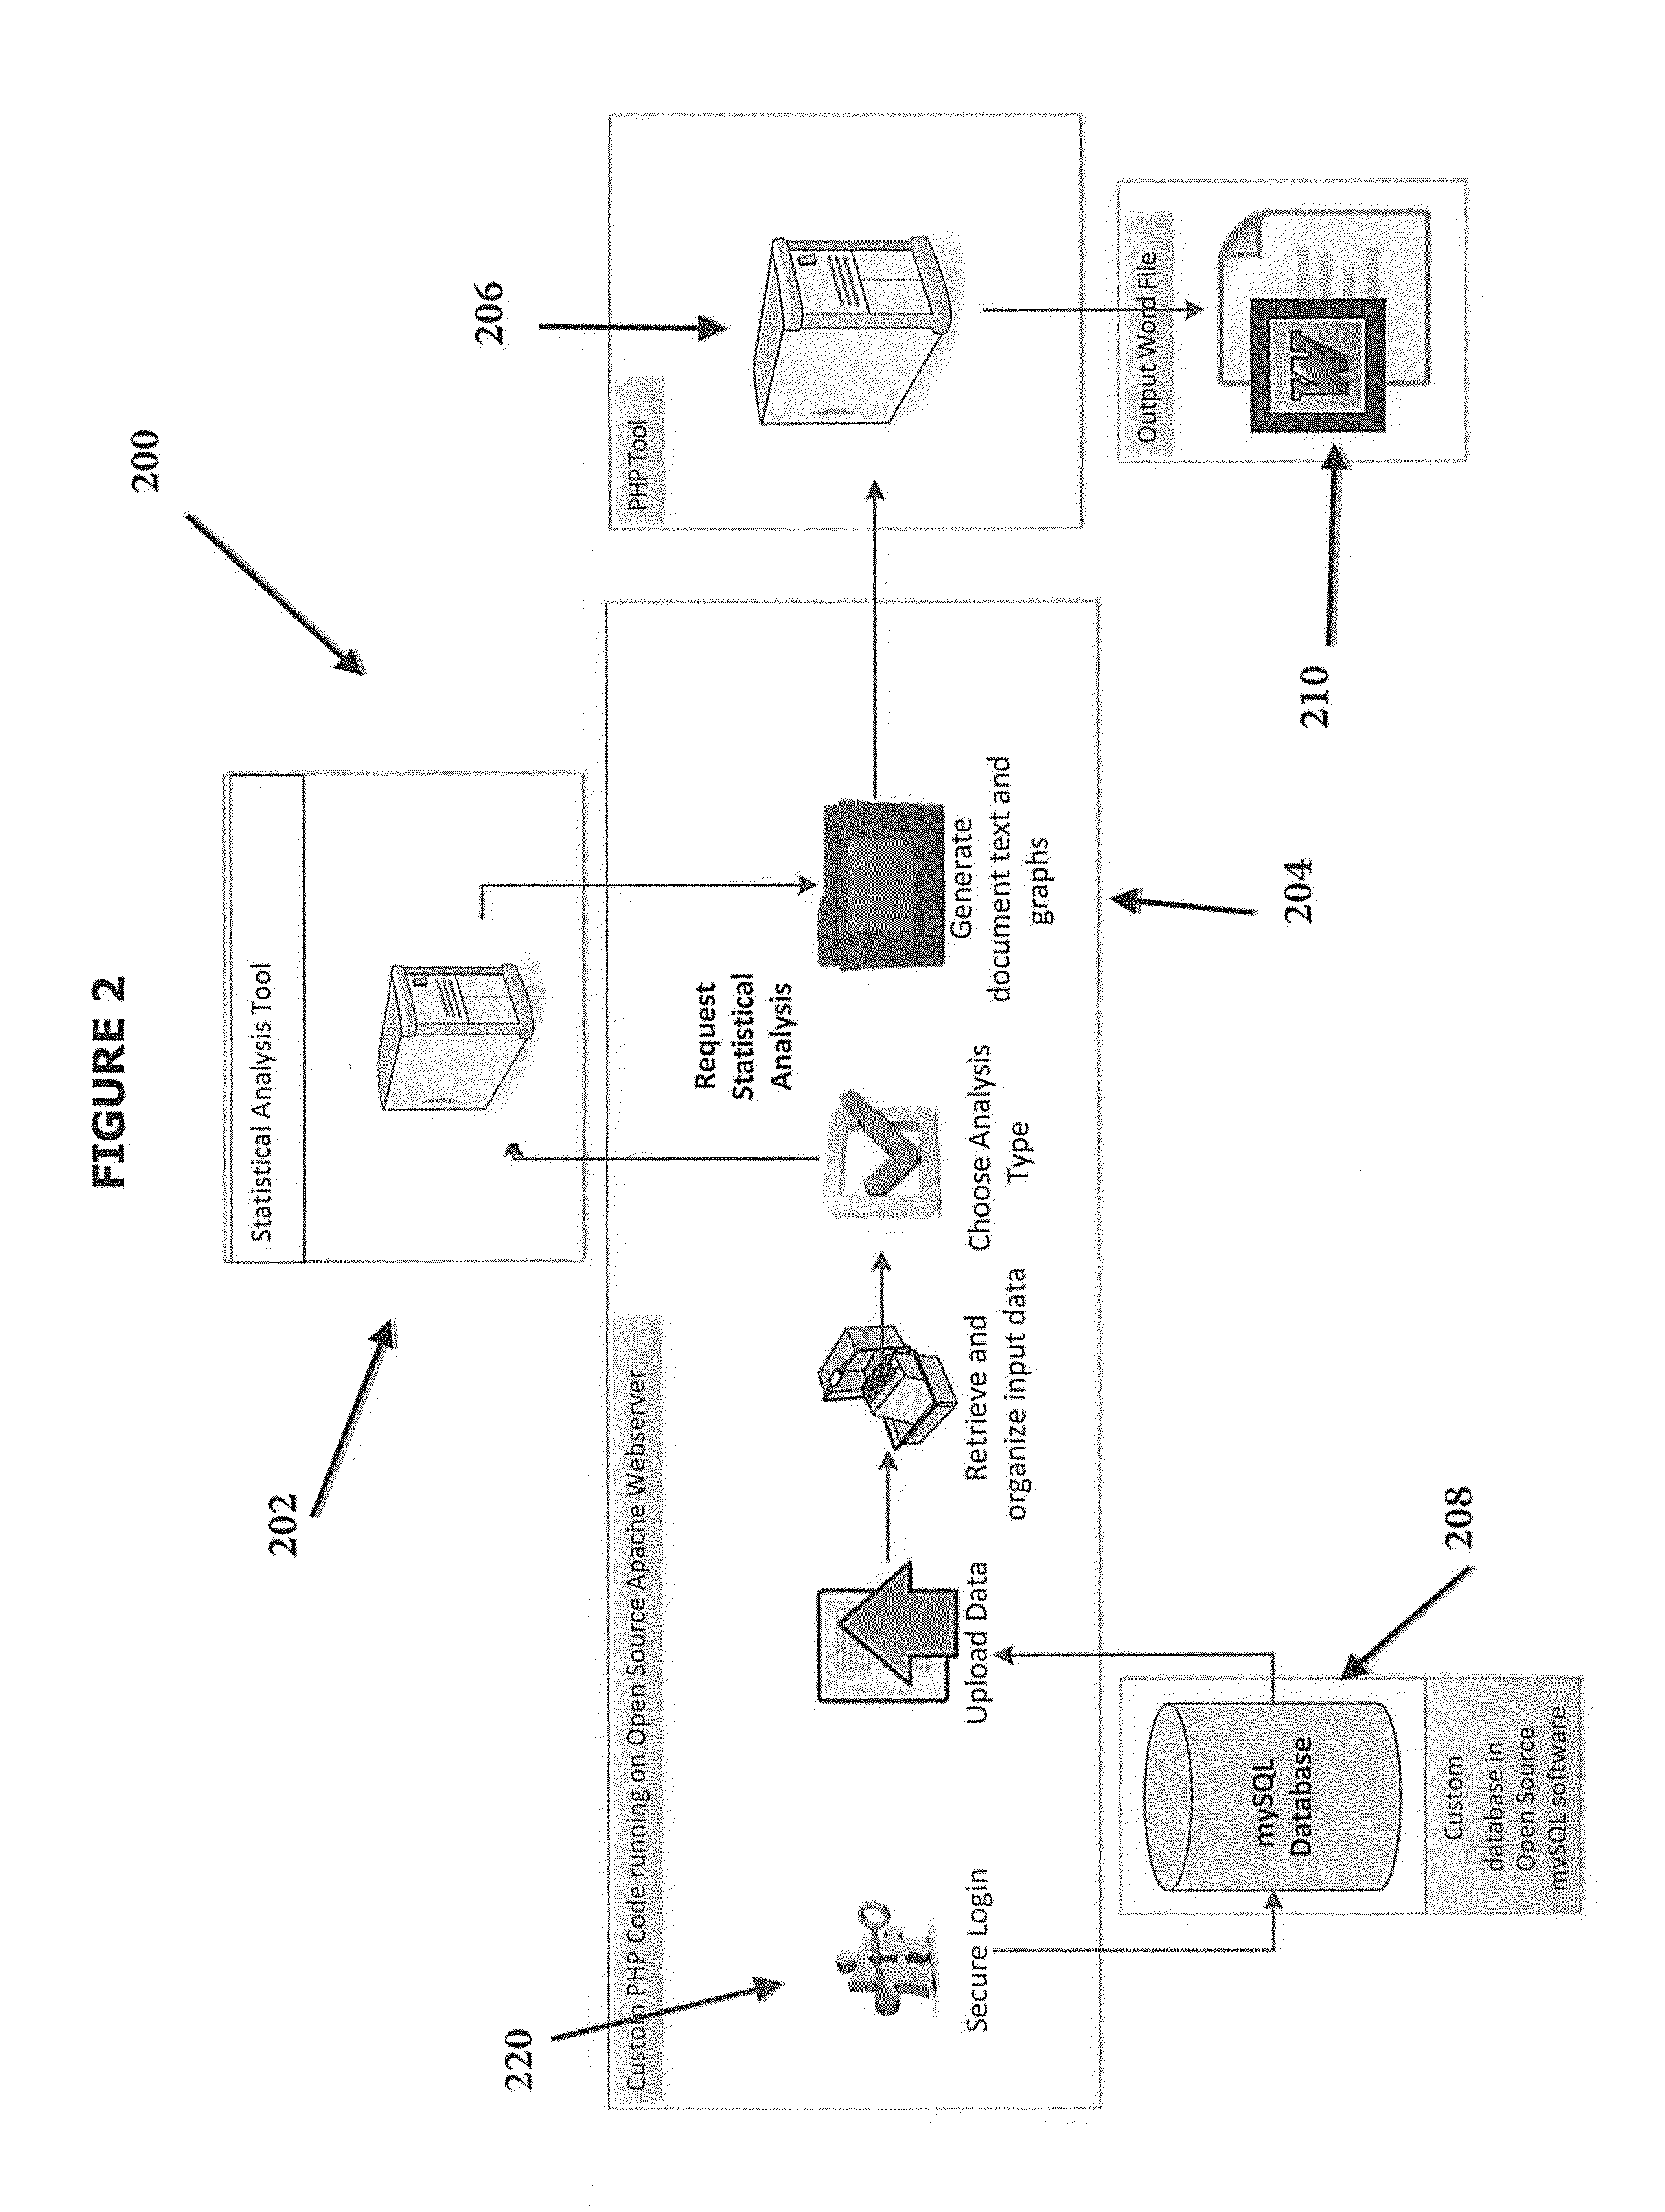 Method and System for Presenting Statistical Data in a Natural Language Format